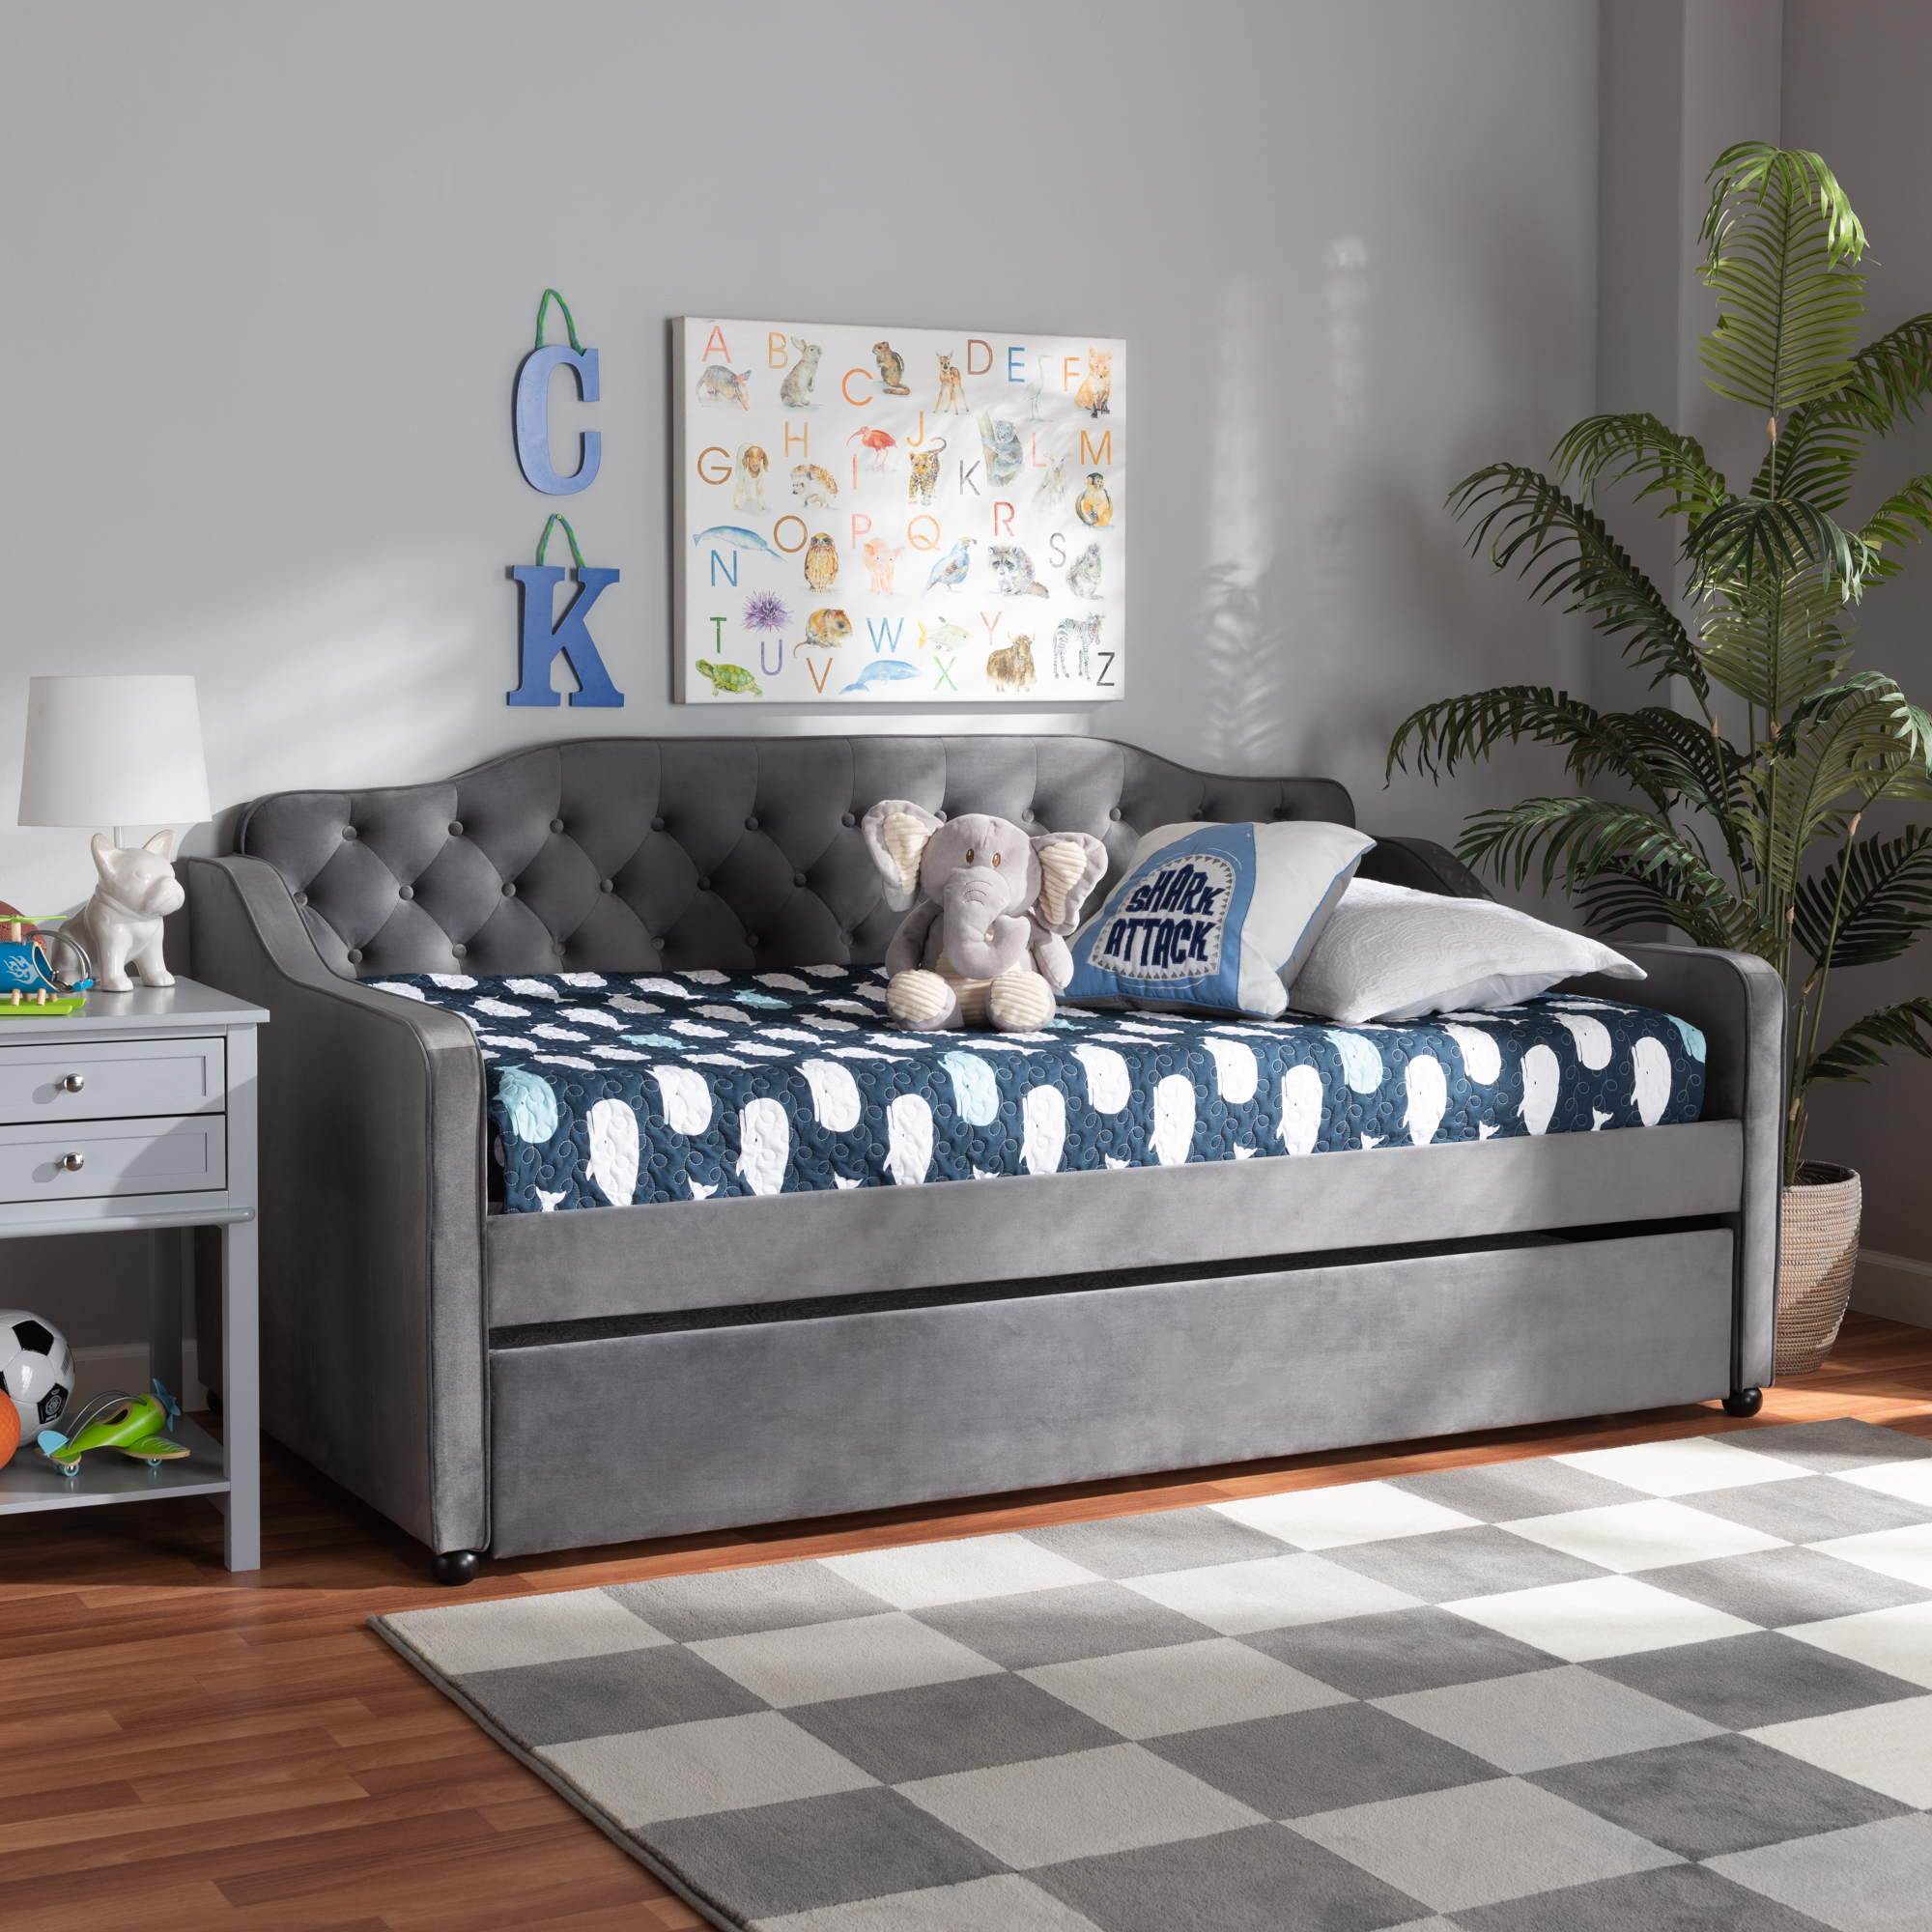 daybed kids room